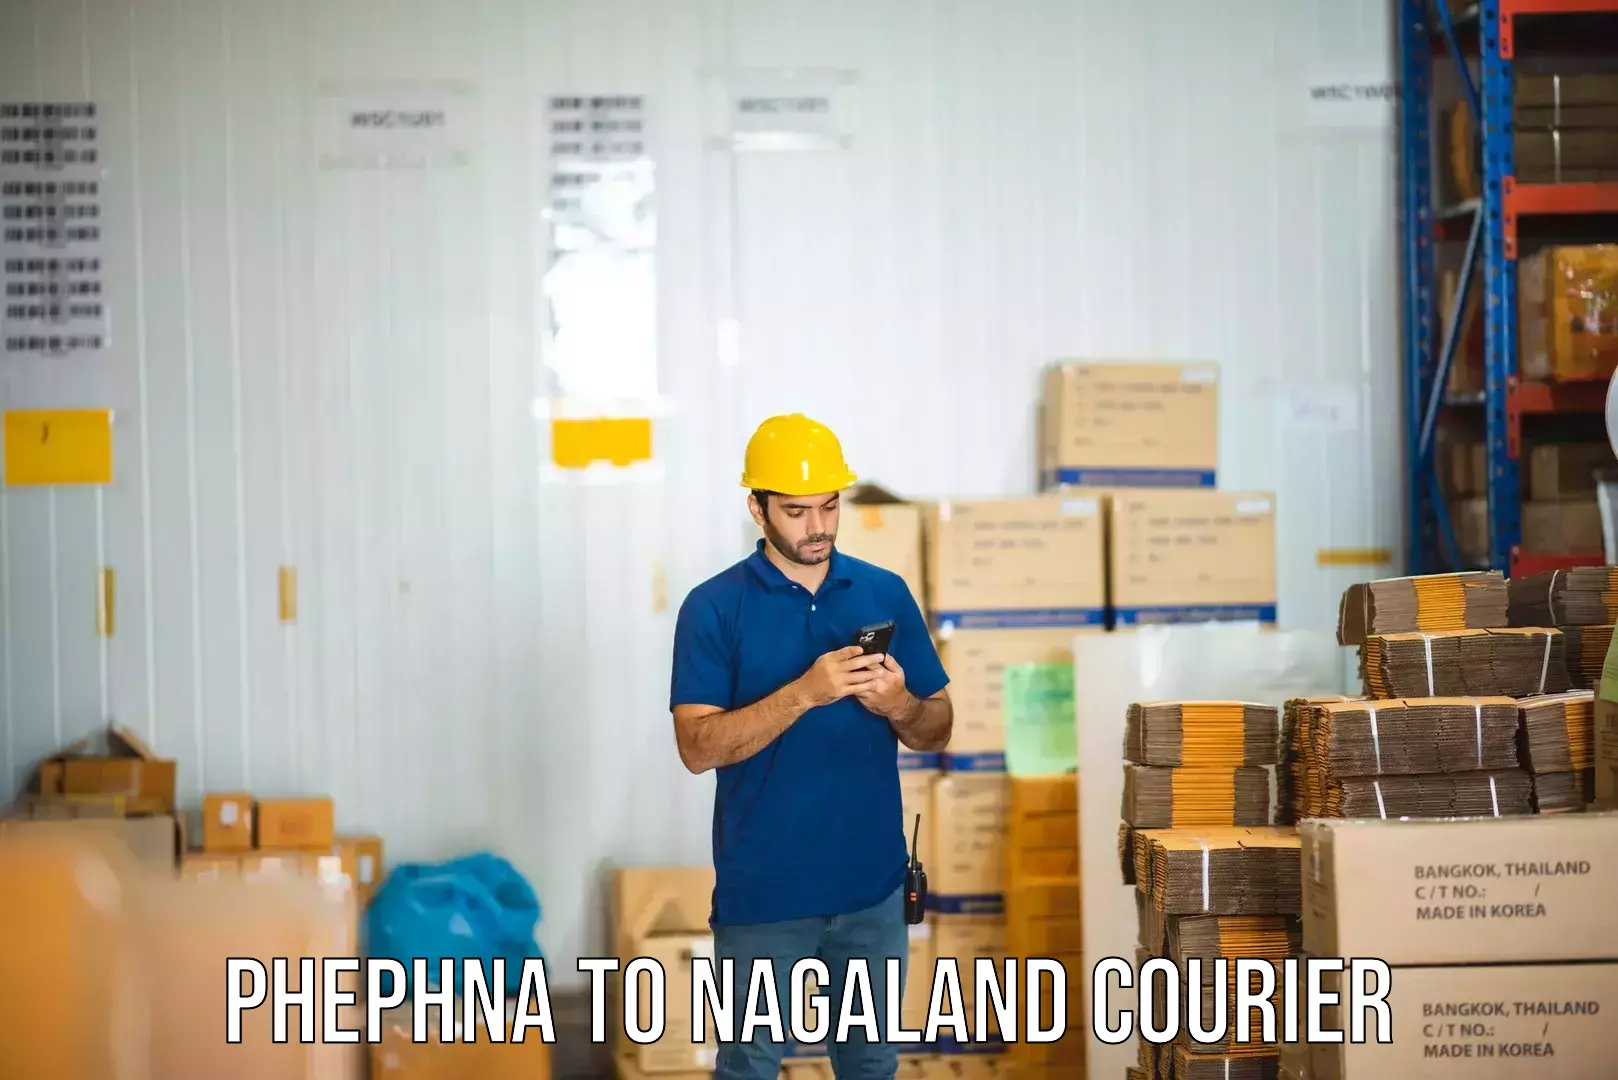 Global courier networks Phephna to Nagaland